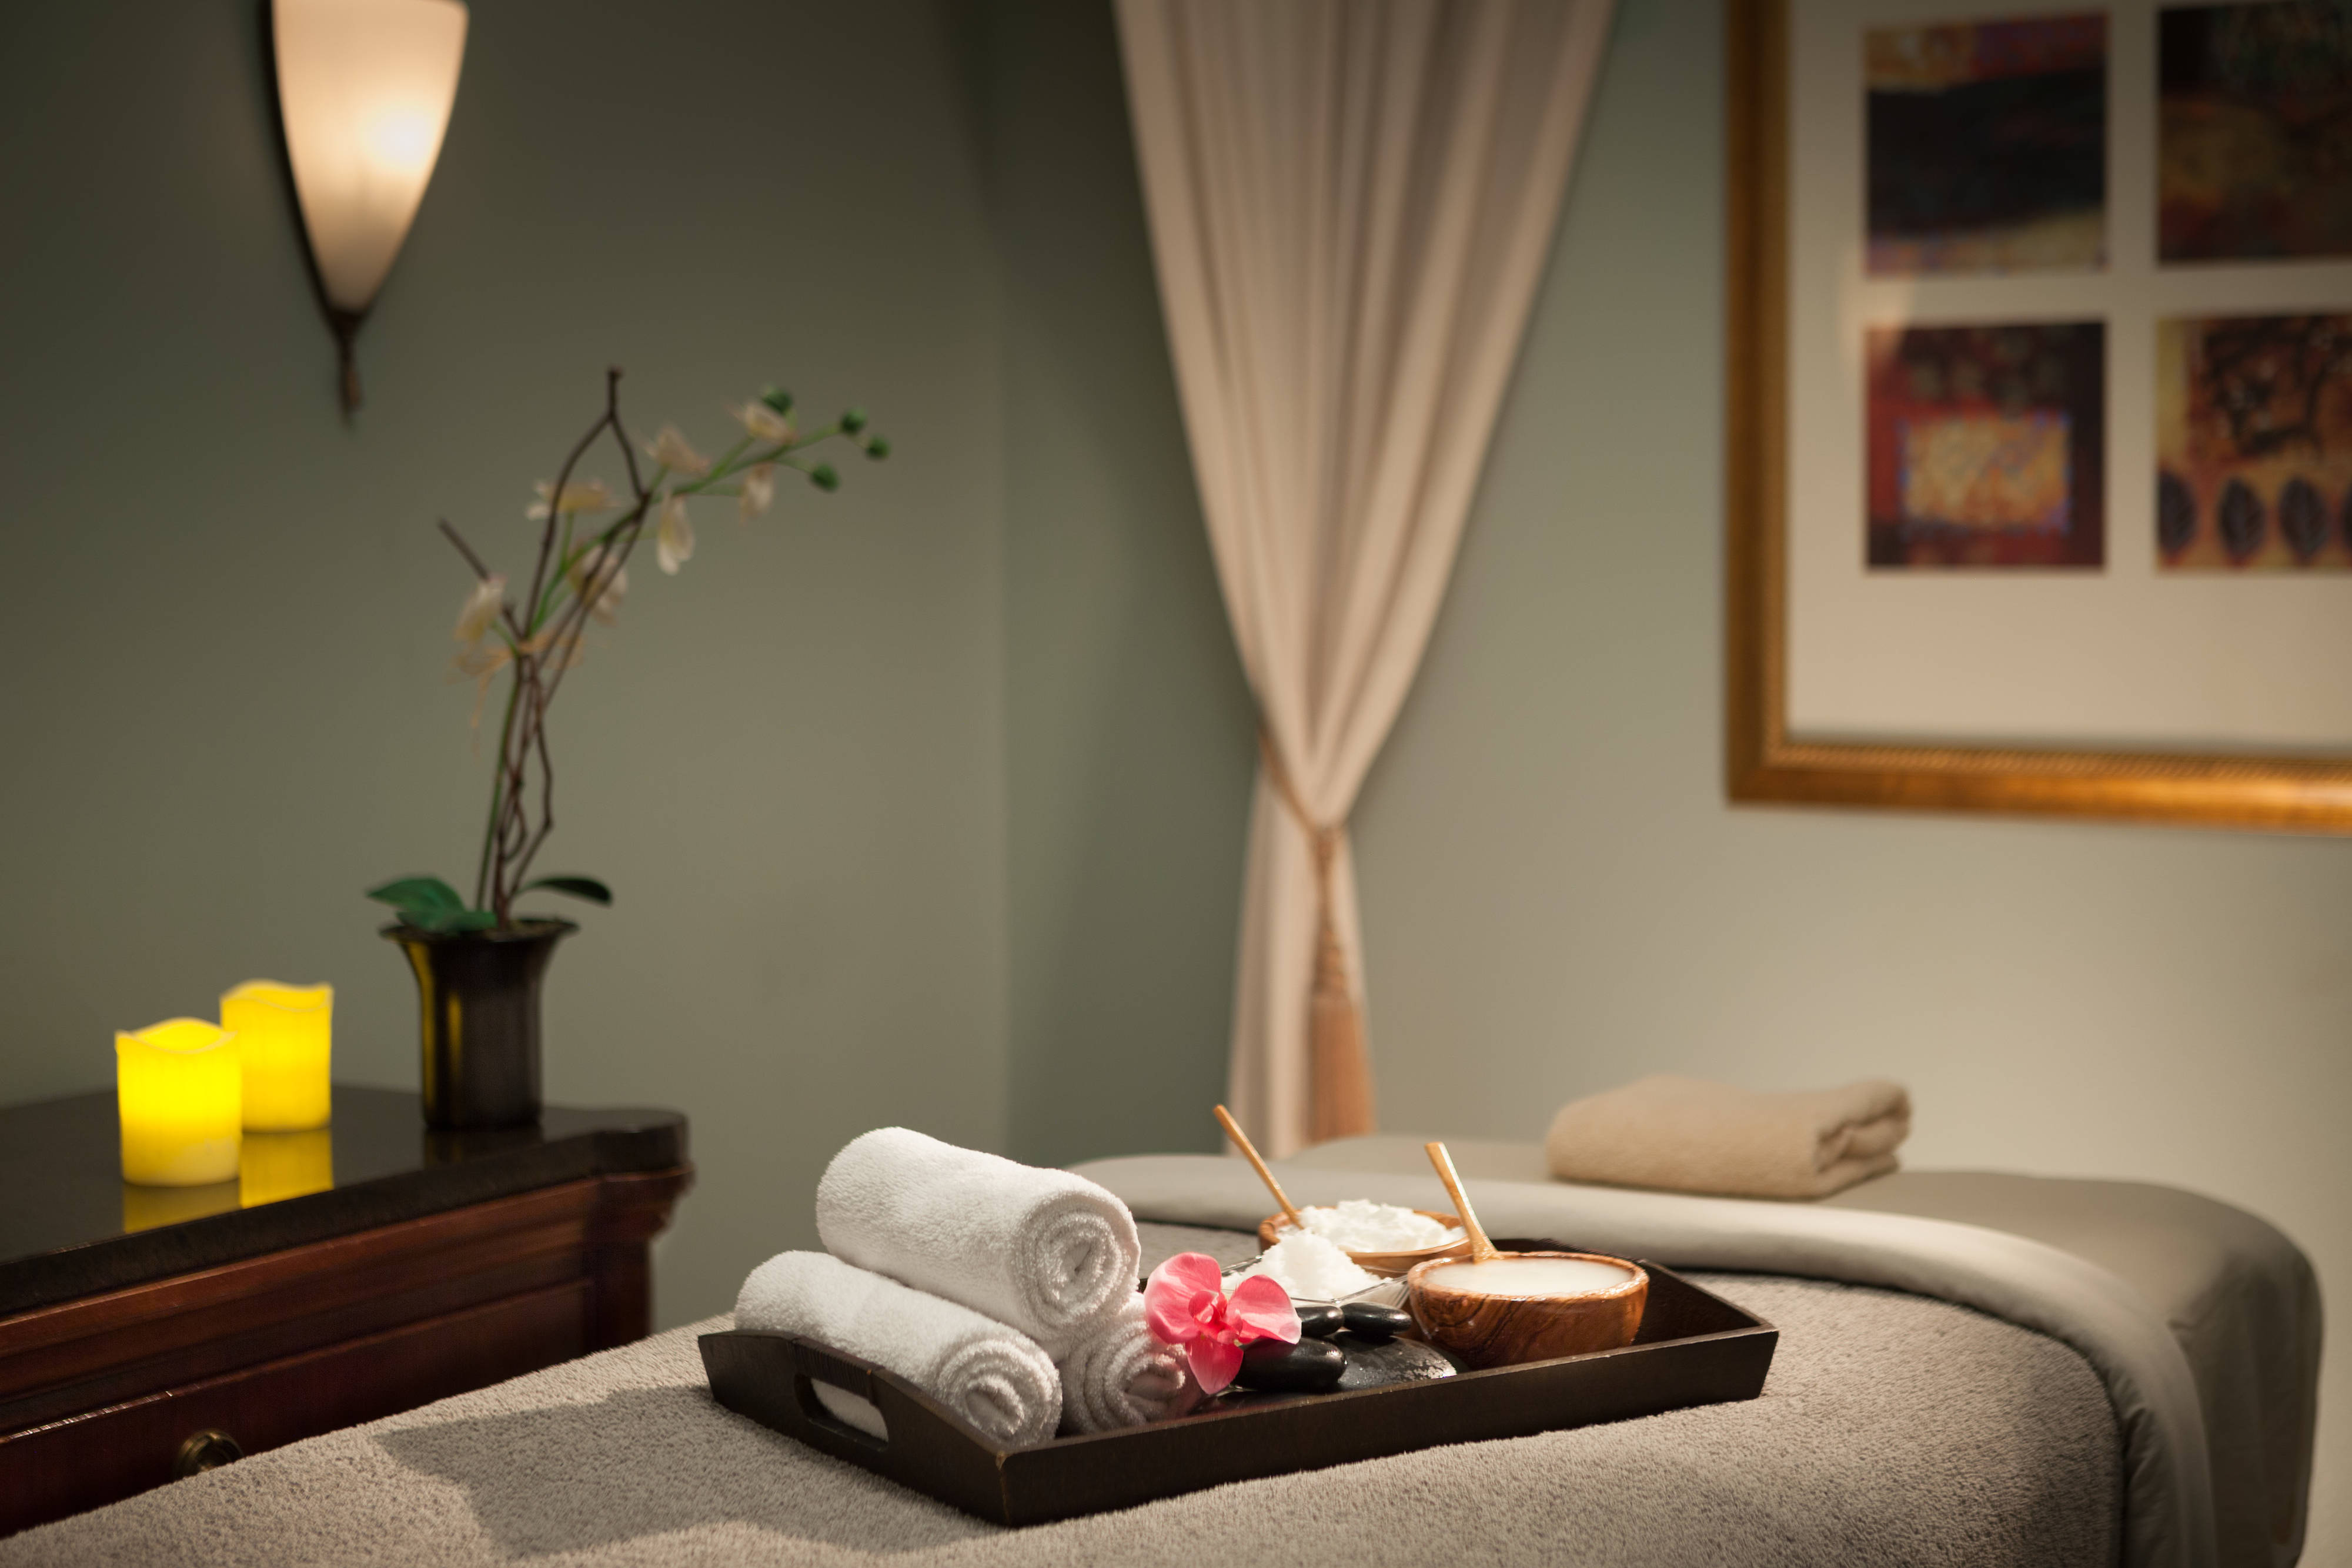 Spa treatment room with walls and treatment table linens in calm, neutral colors